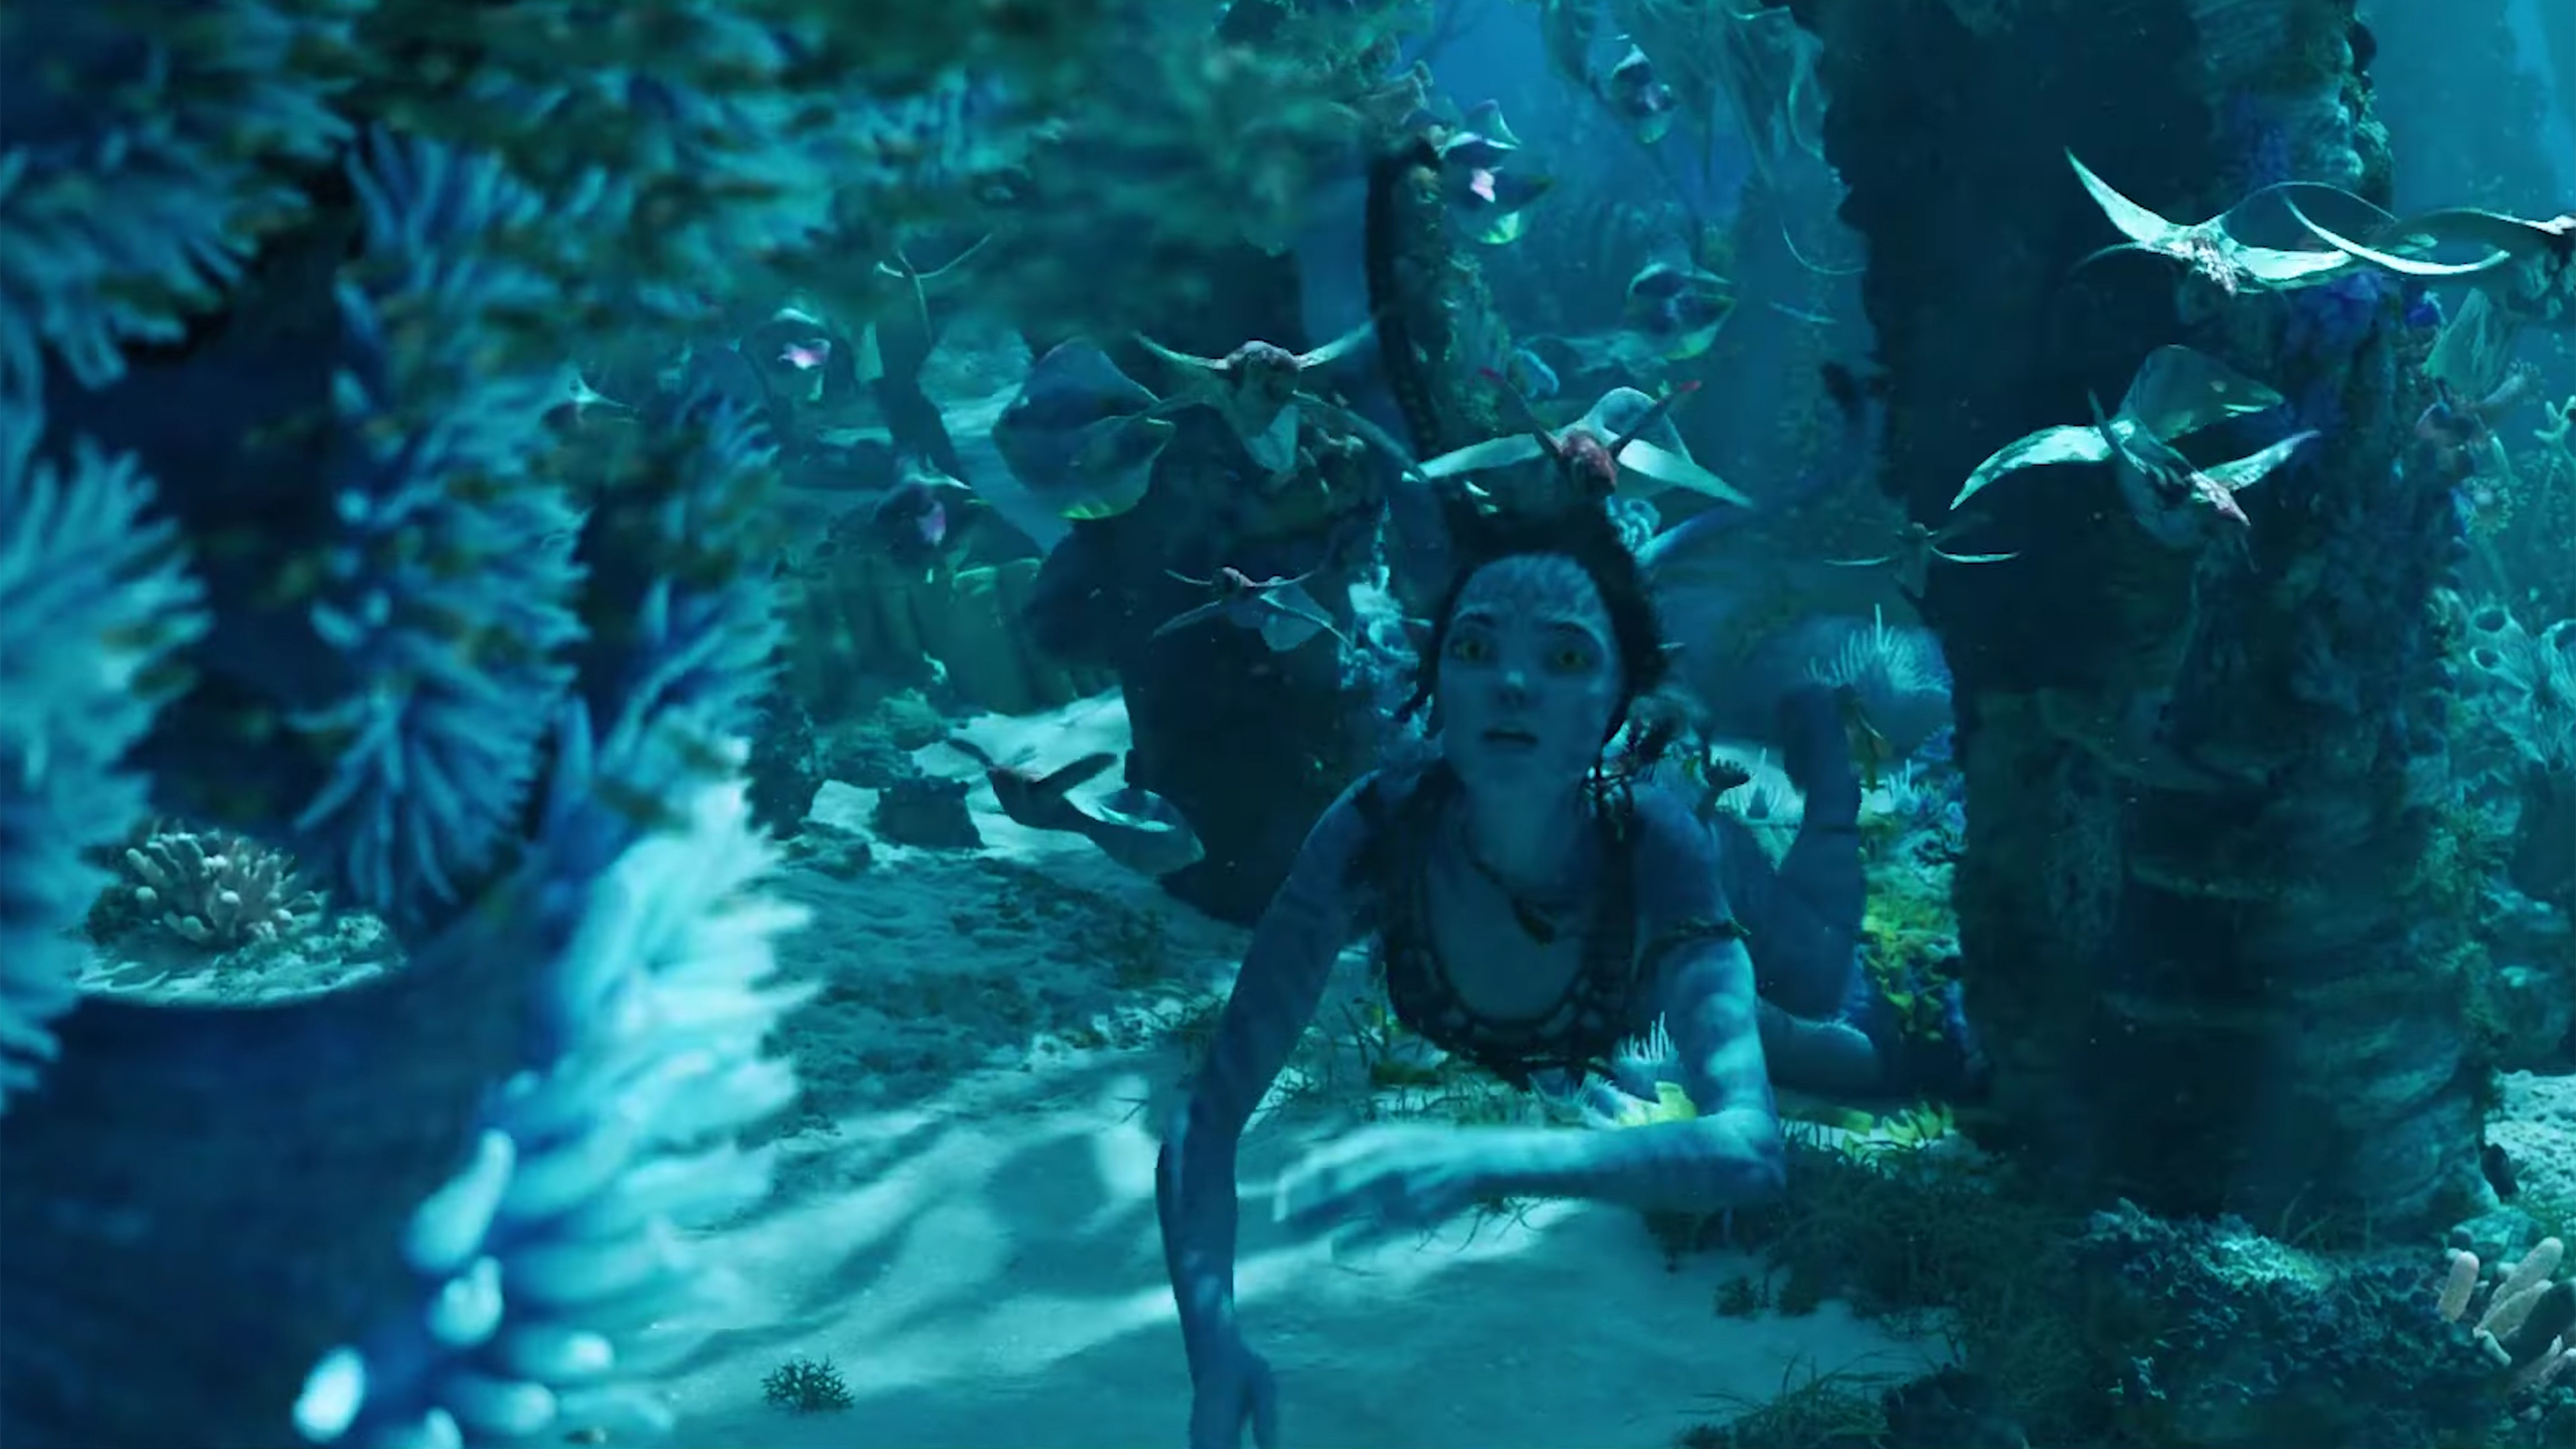 Wallpaper Avatar 2 The Way of Water, 4k, trailer, Movies #23985 - Page 4